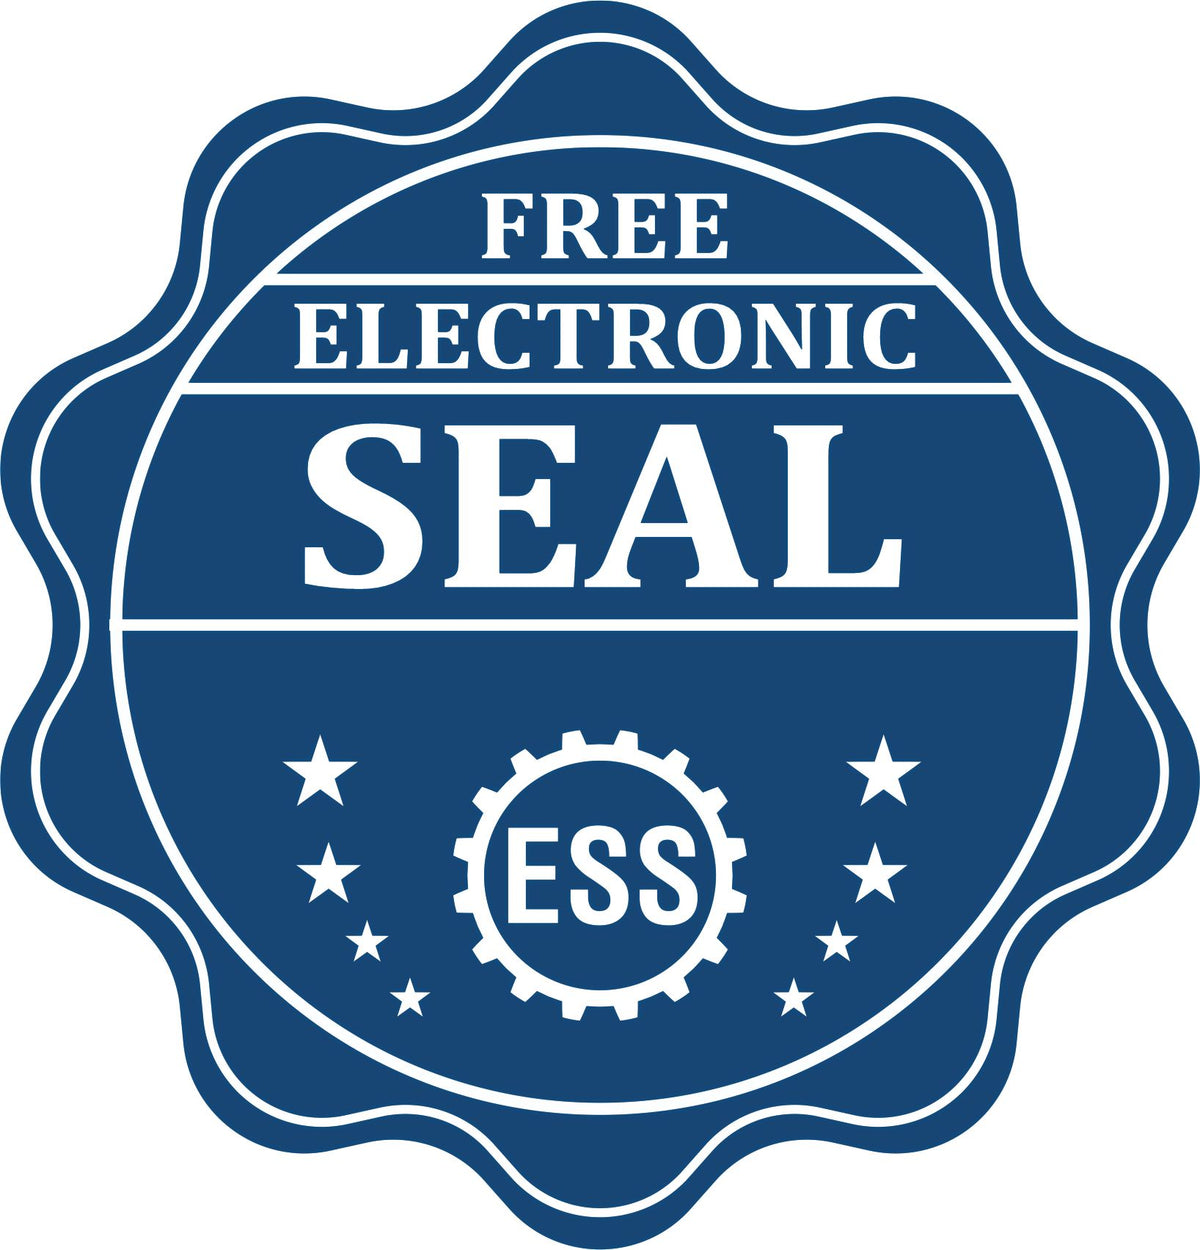 A badge showing a free electronic seal for the Soft Mississippi Professional Geologist Seal with stars and the ESS gear on the emblem.